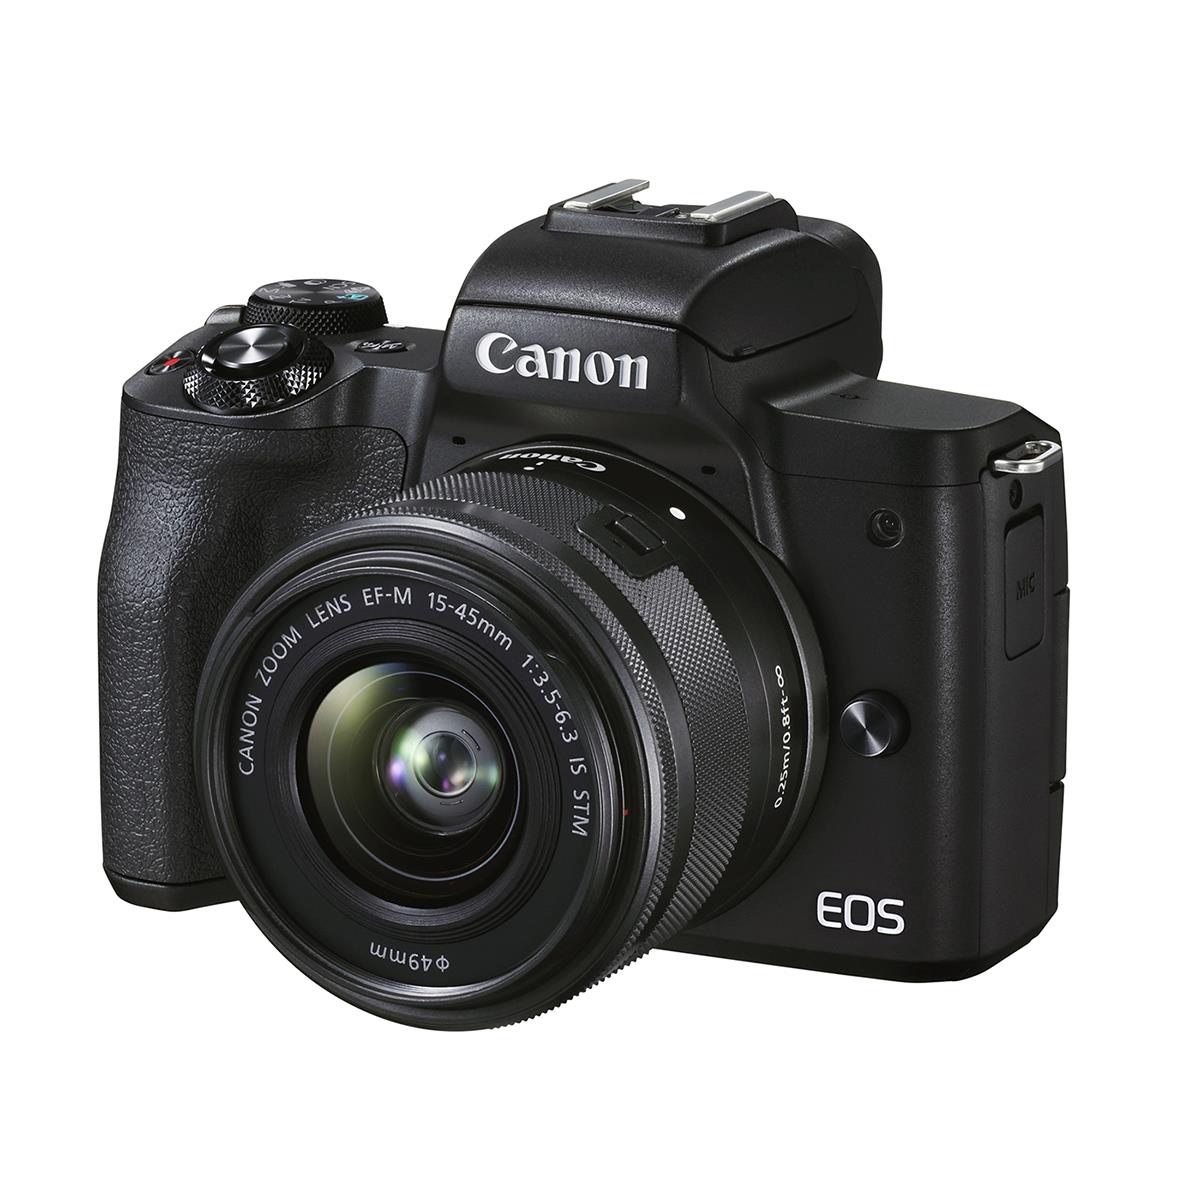 Image of Canon EOS M50 Mark II Camera with EF-M 15-45mm f/3.5-6.3 IS STM Lens